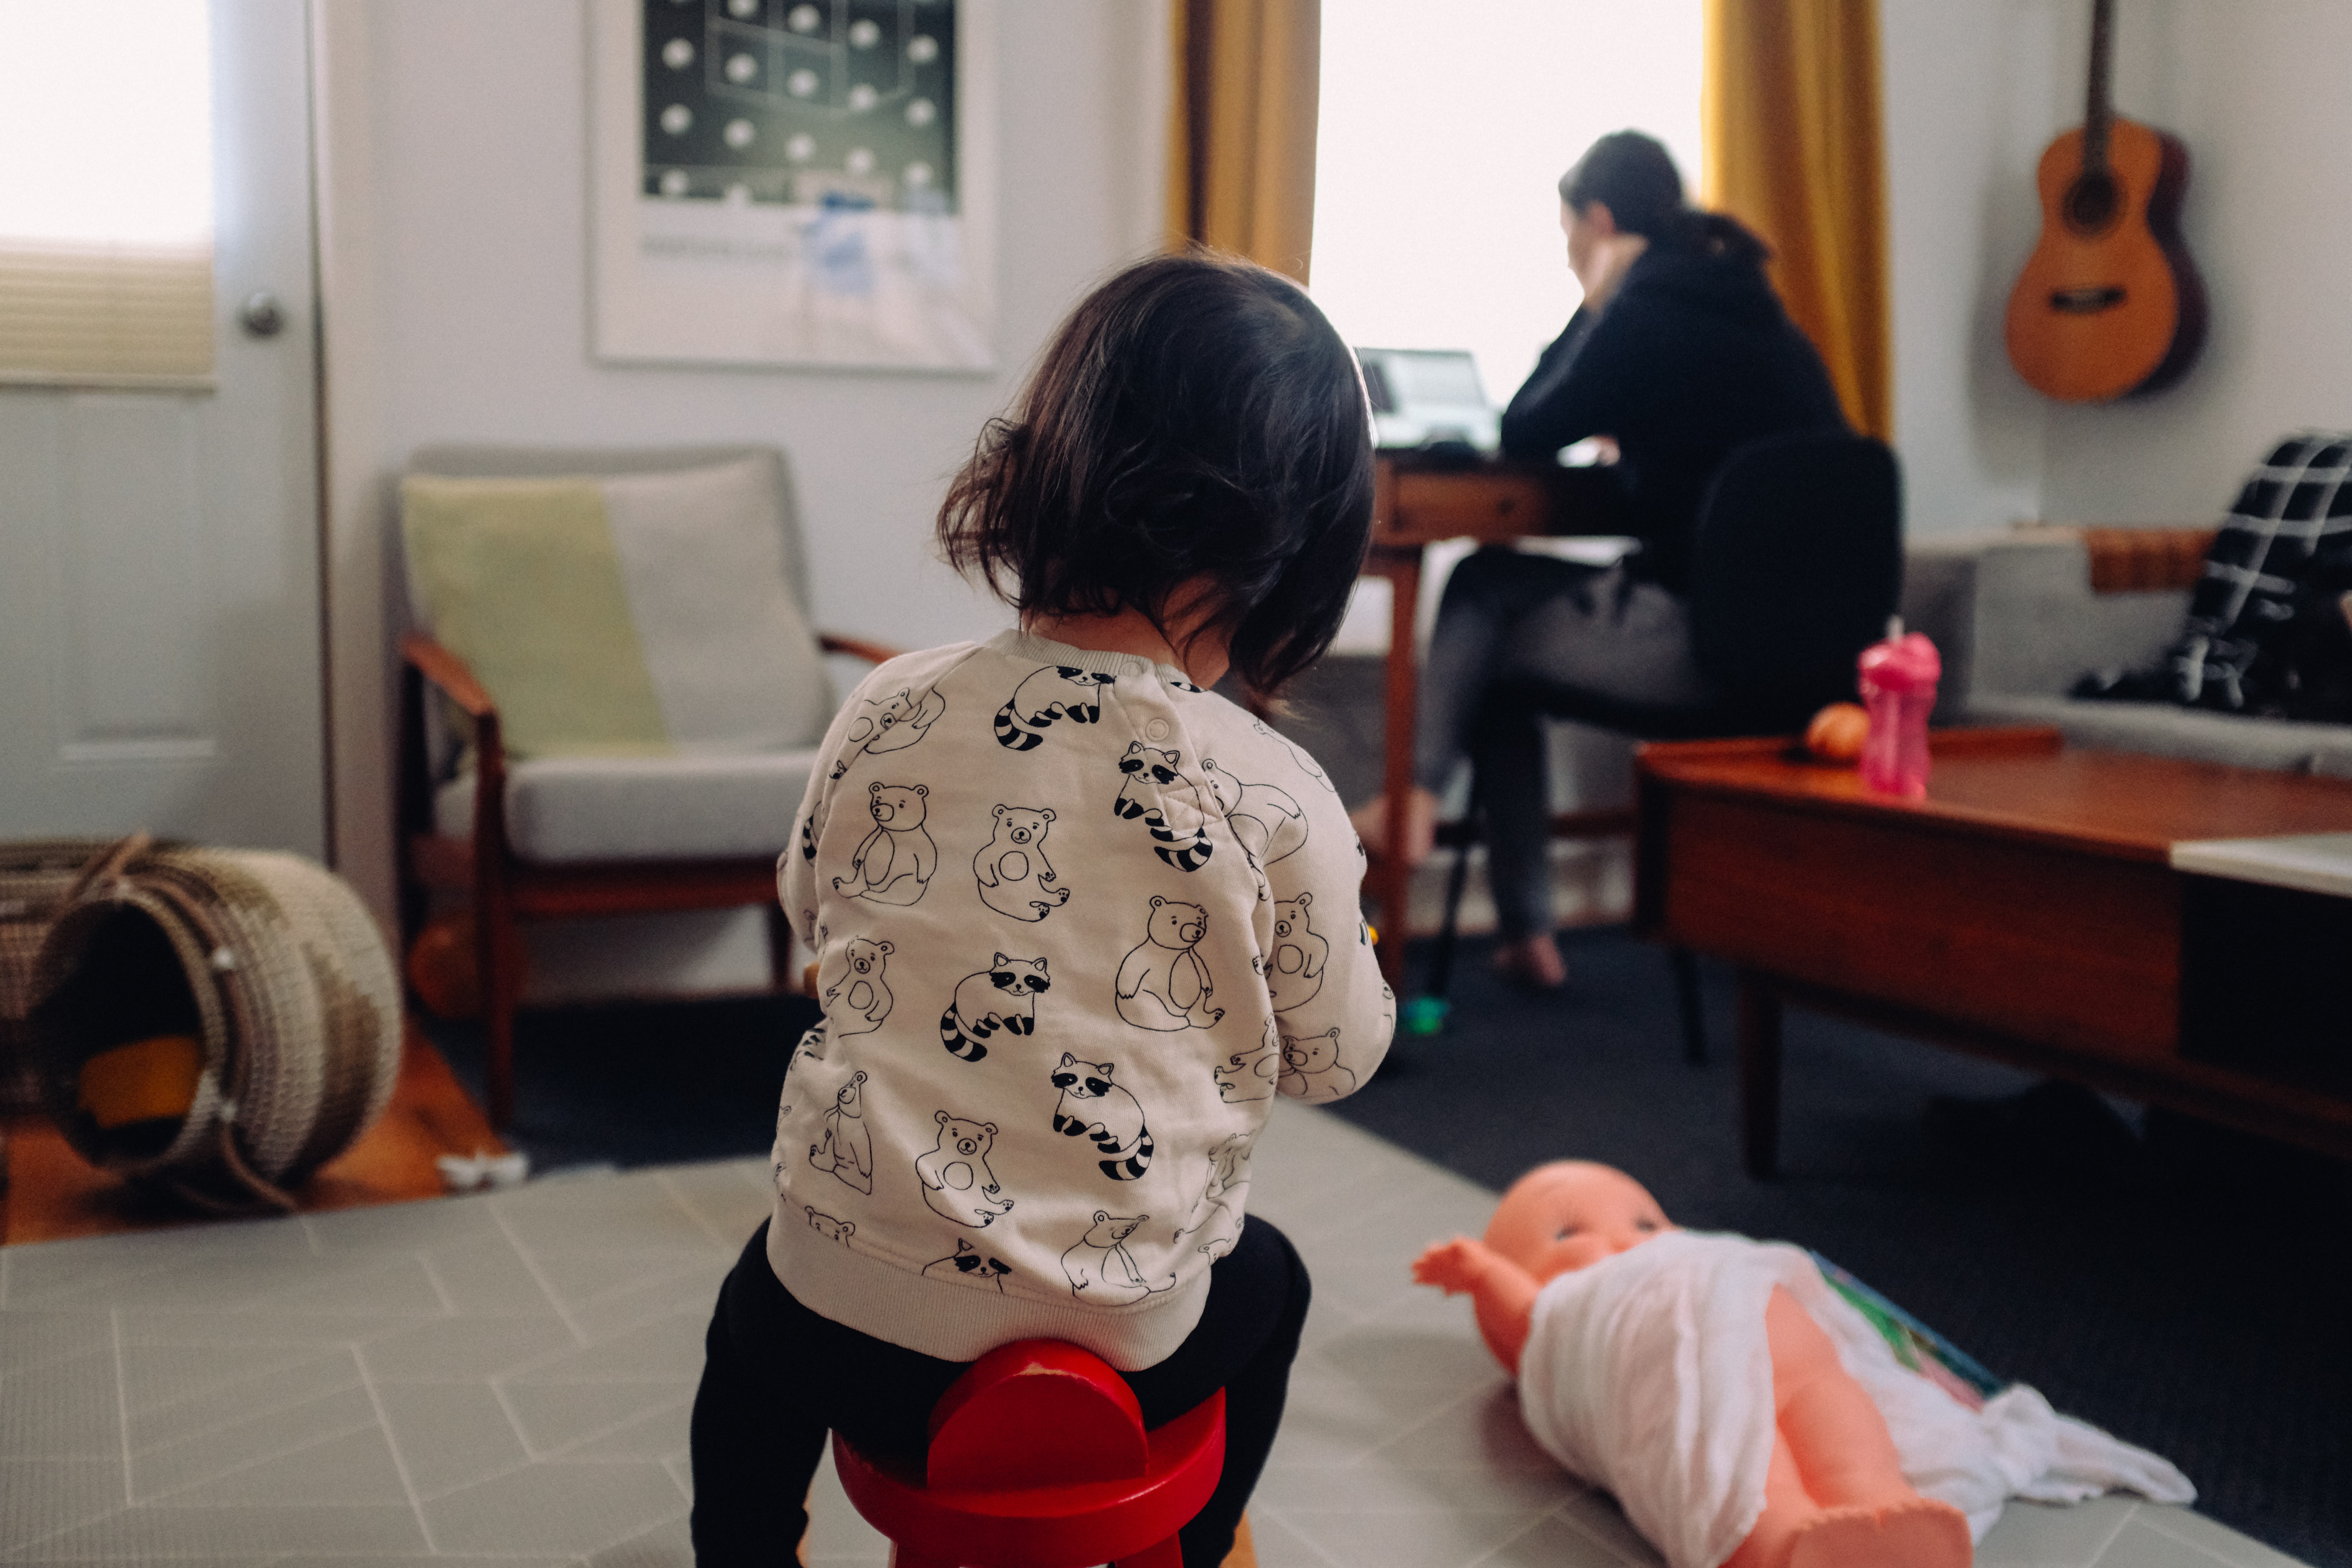 Child playing in a living room with a woman working on a laptop in the background